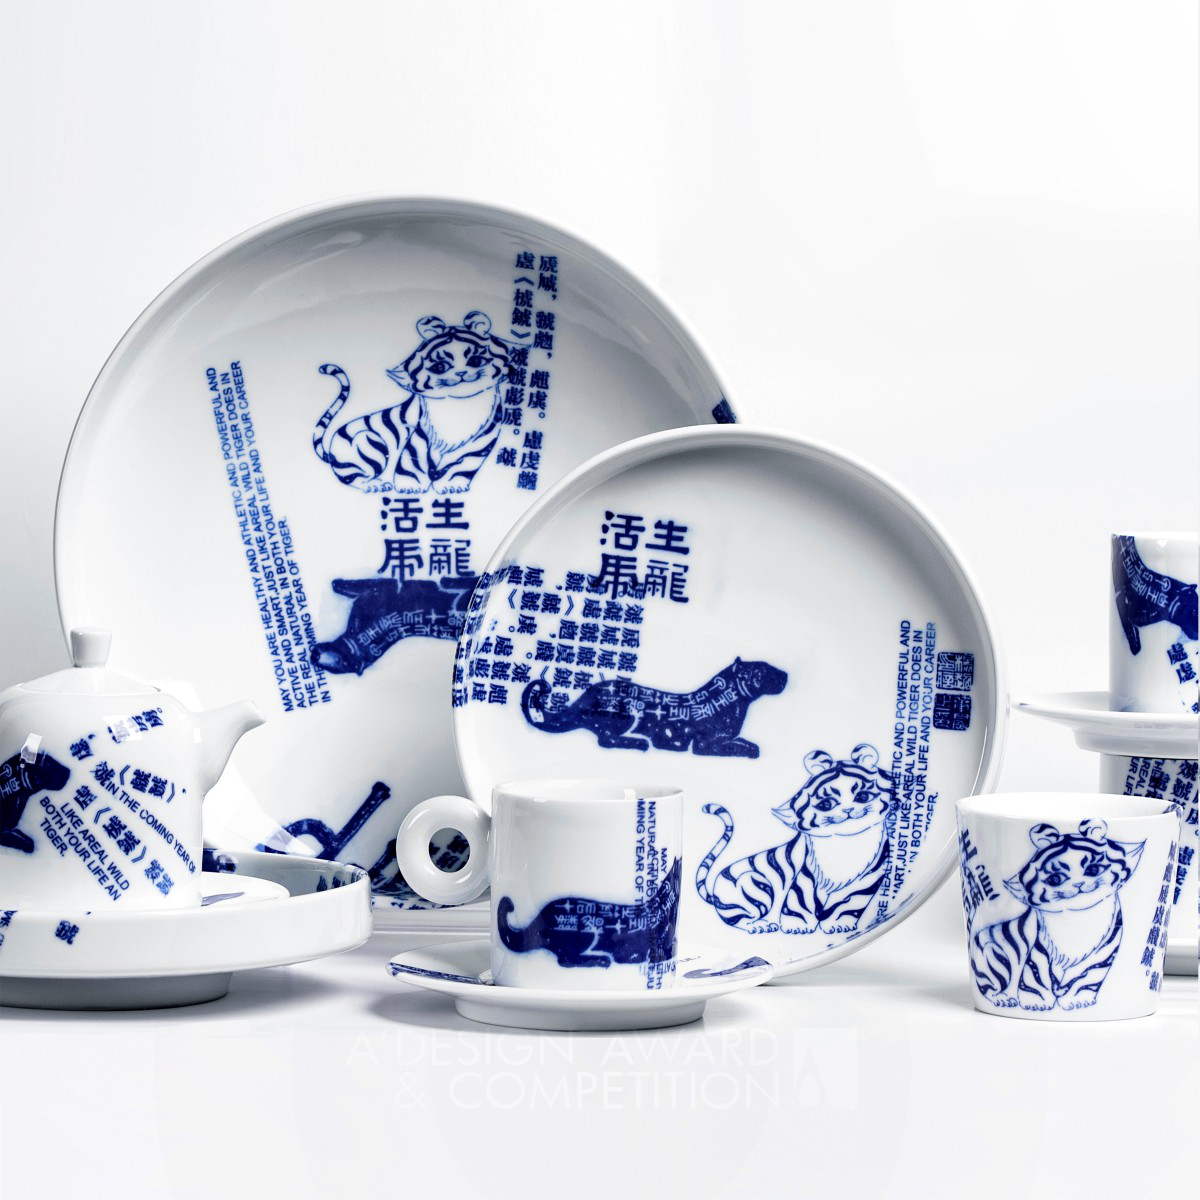 Tiger 2022 Ceramic Tableware by Chen Zilong